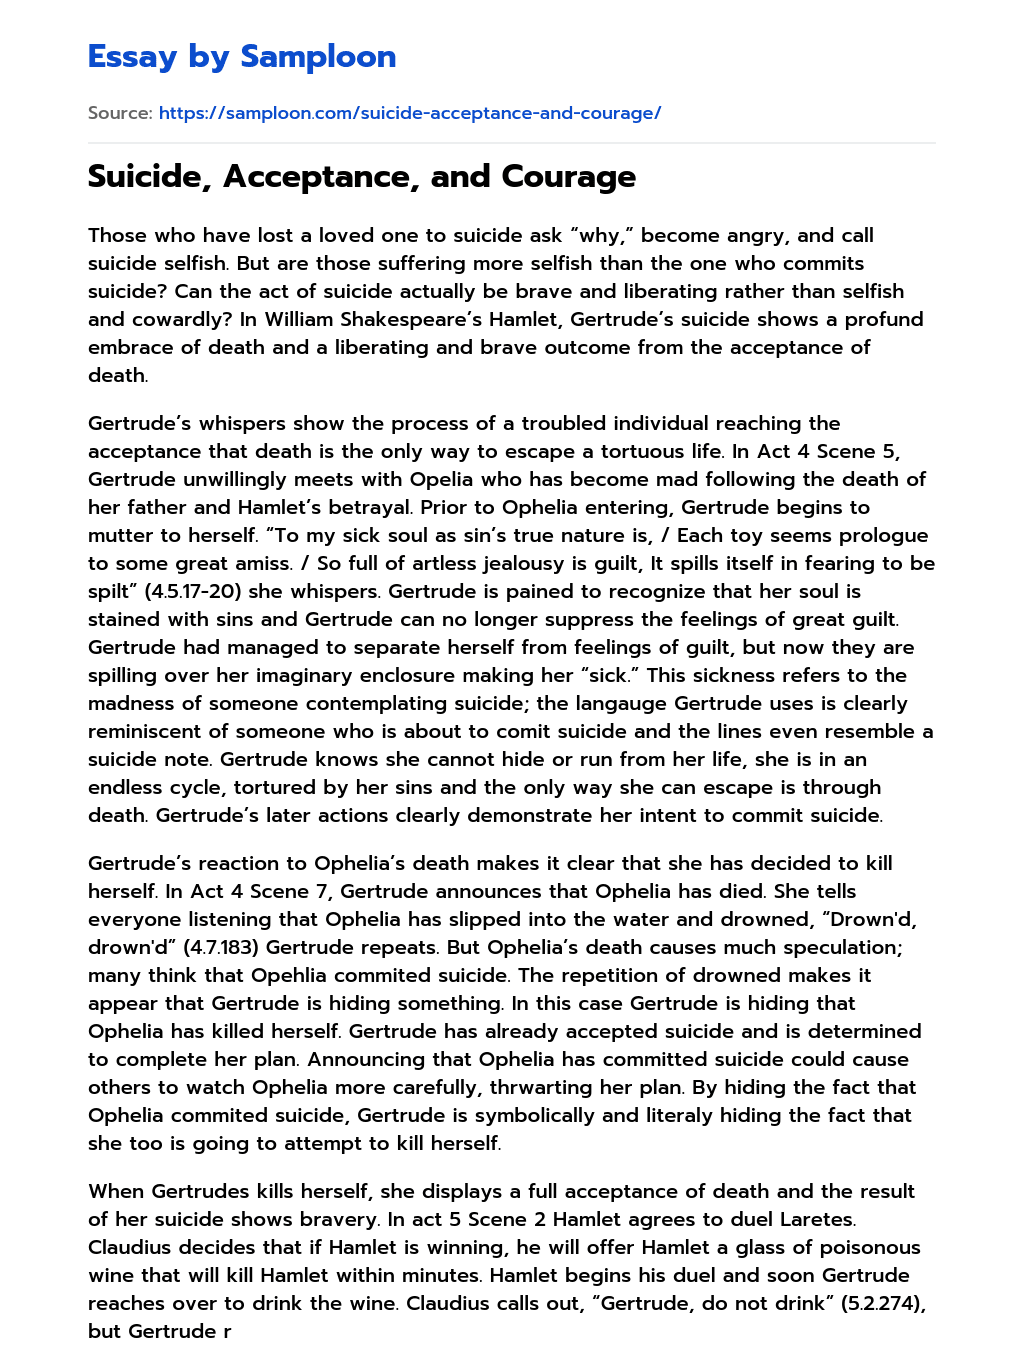 Suicide, Acceptance, and Courage essay